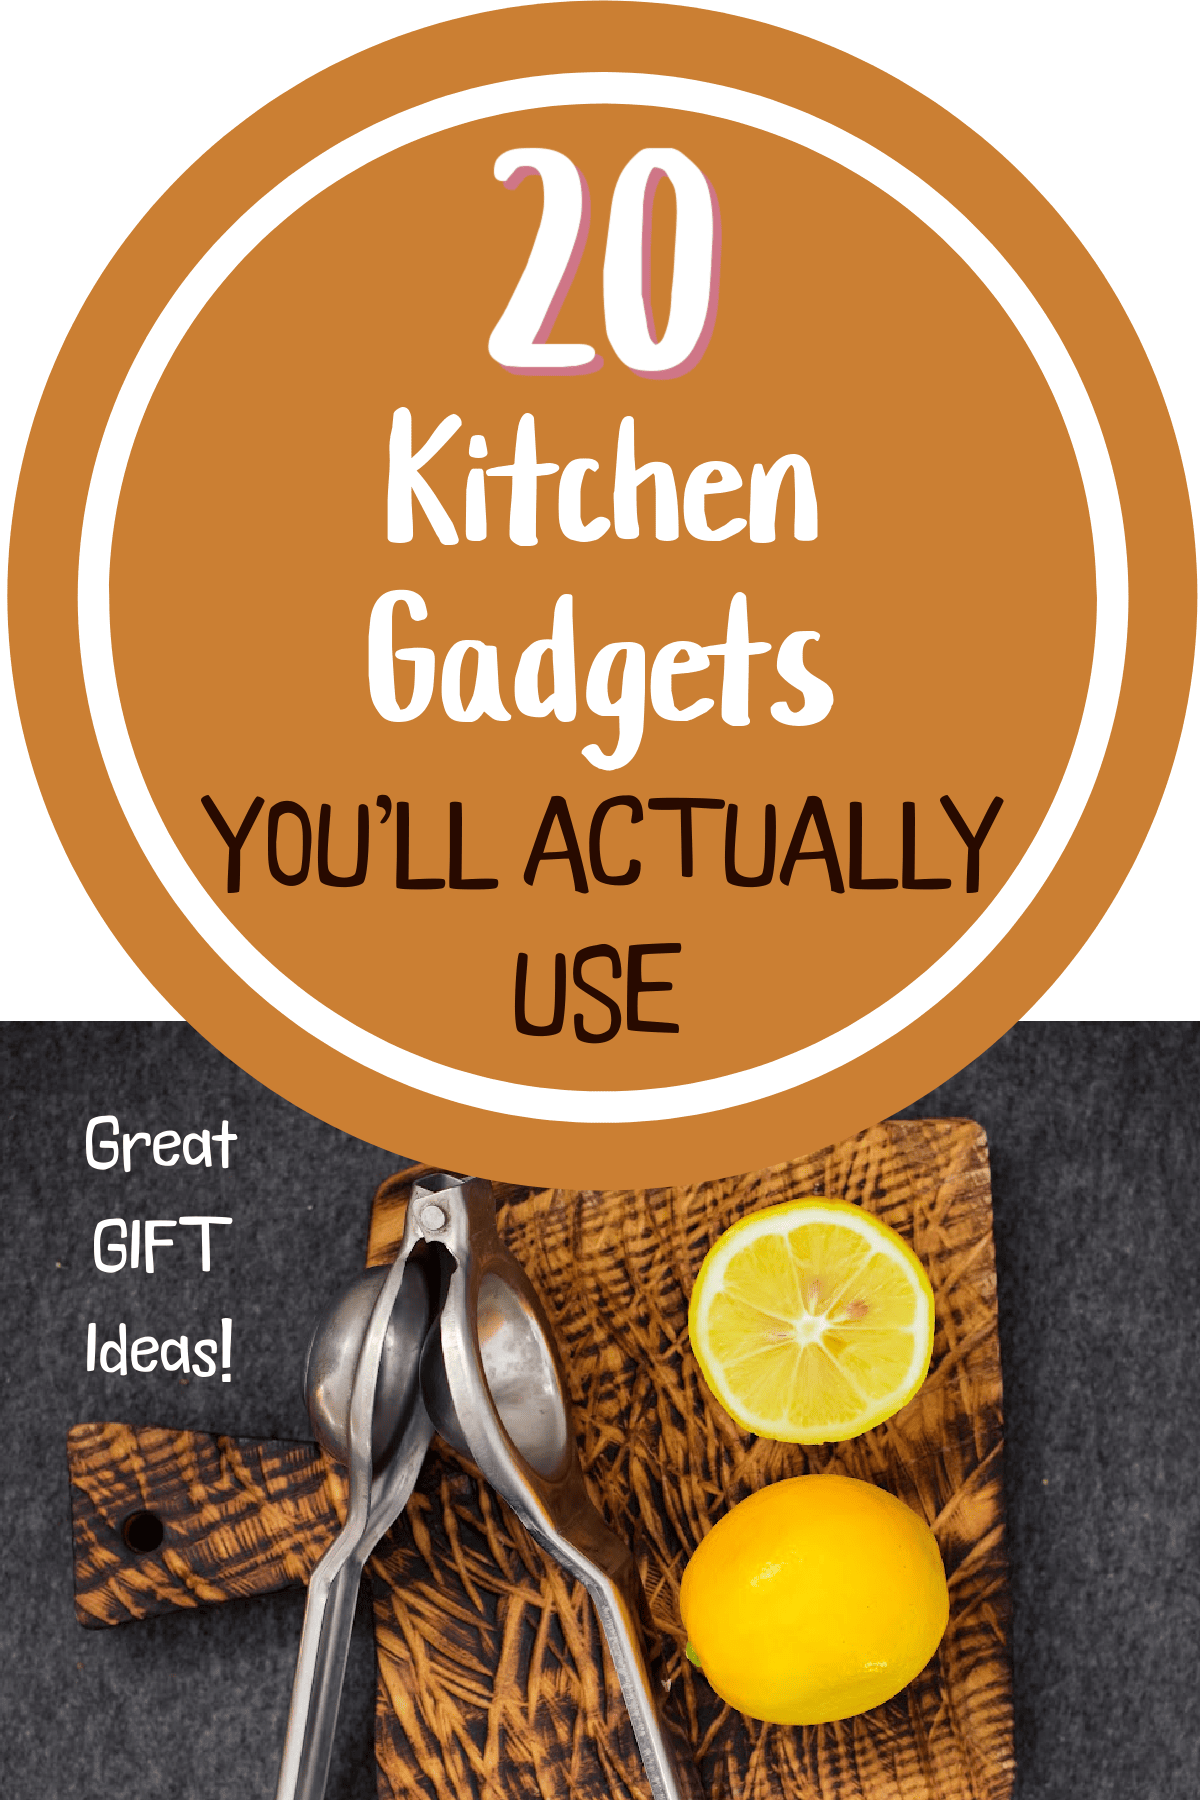 20 kitchen utensils and gadgets you'll actually use.